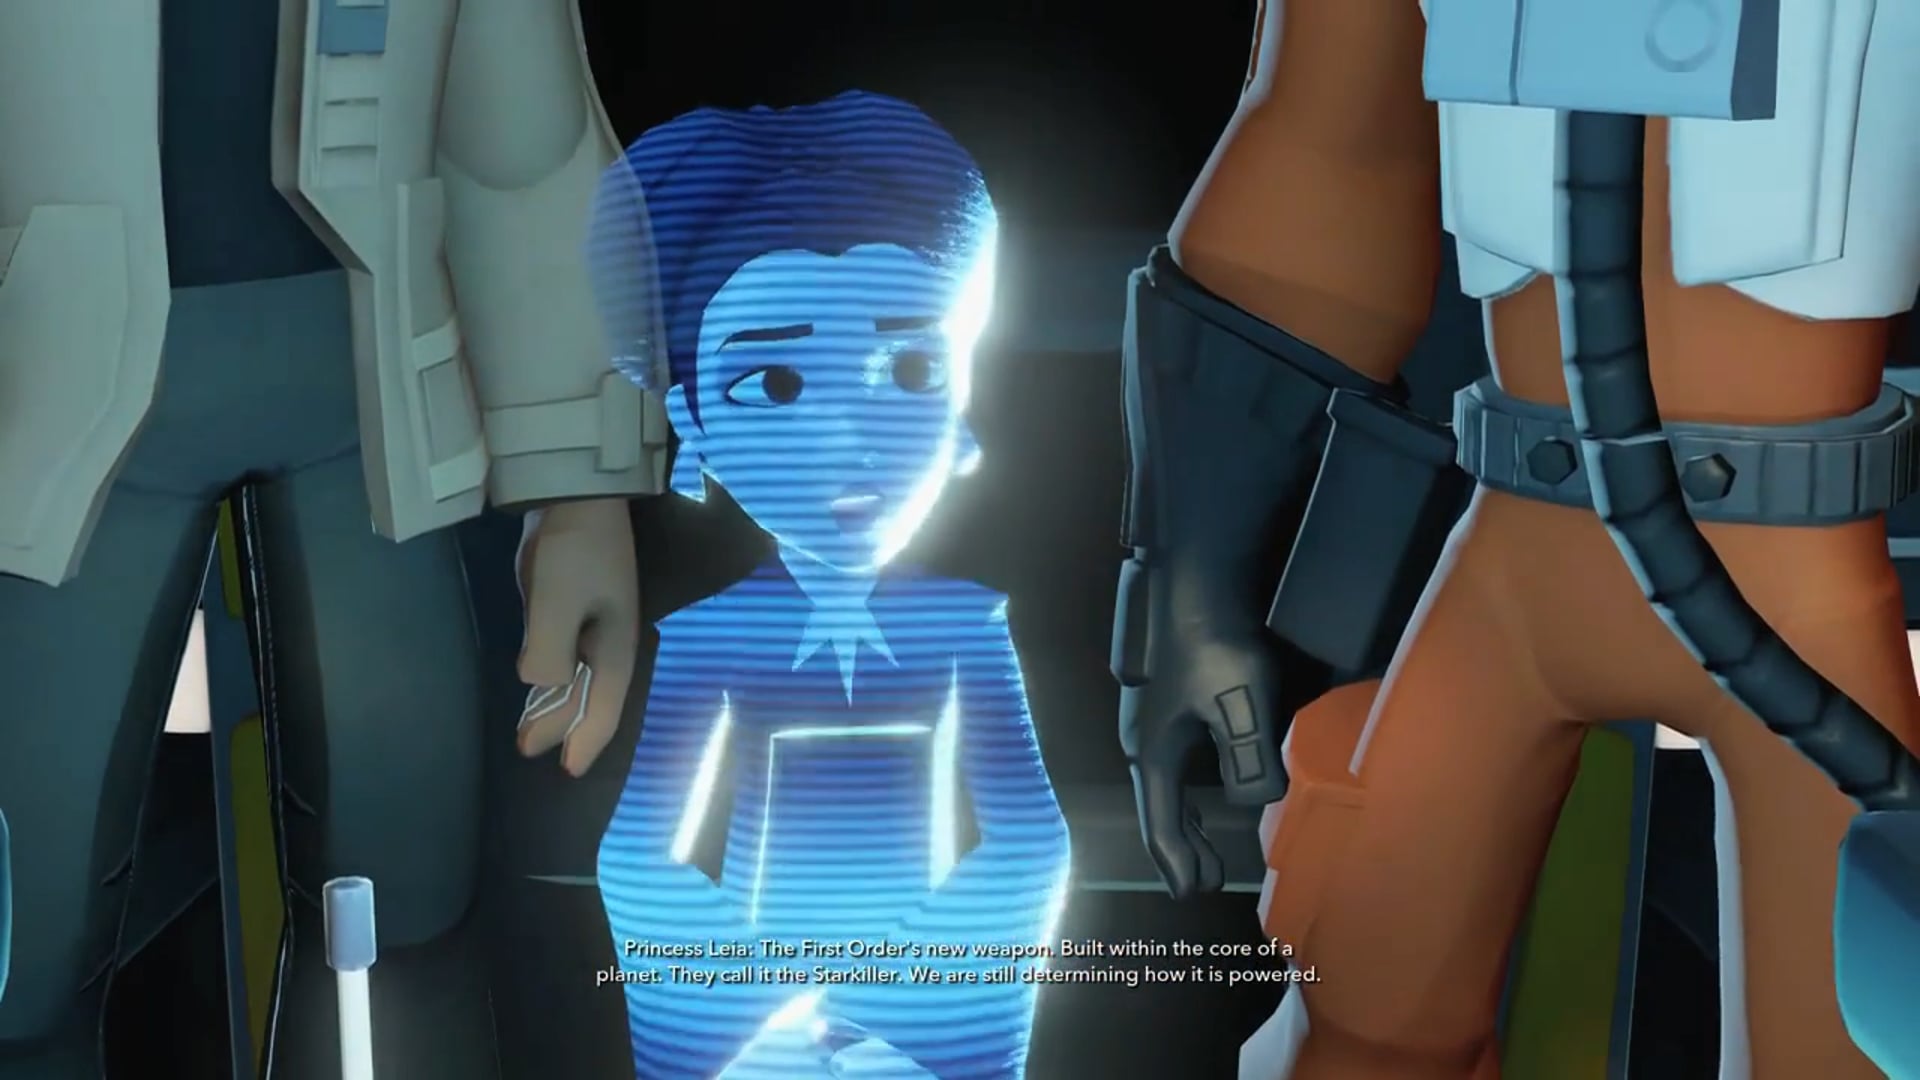 Disney Infinity 3.0 - The Force Awakens - Role of "General Leia Organa"